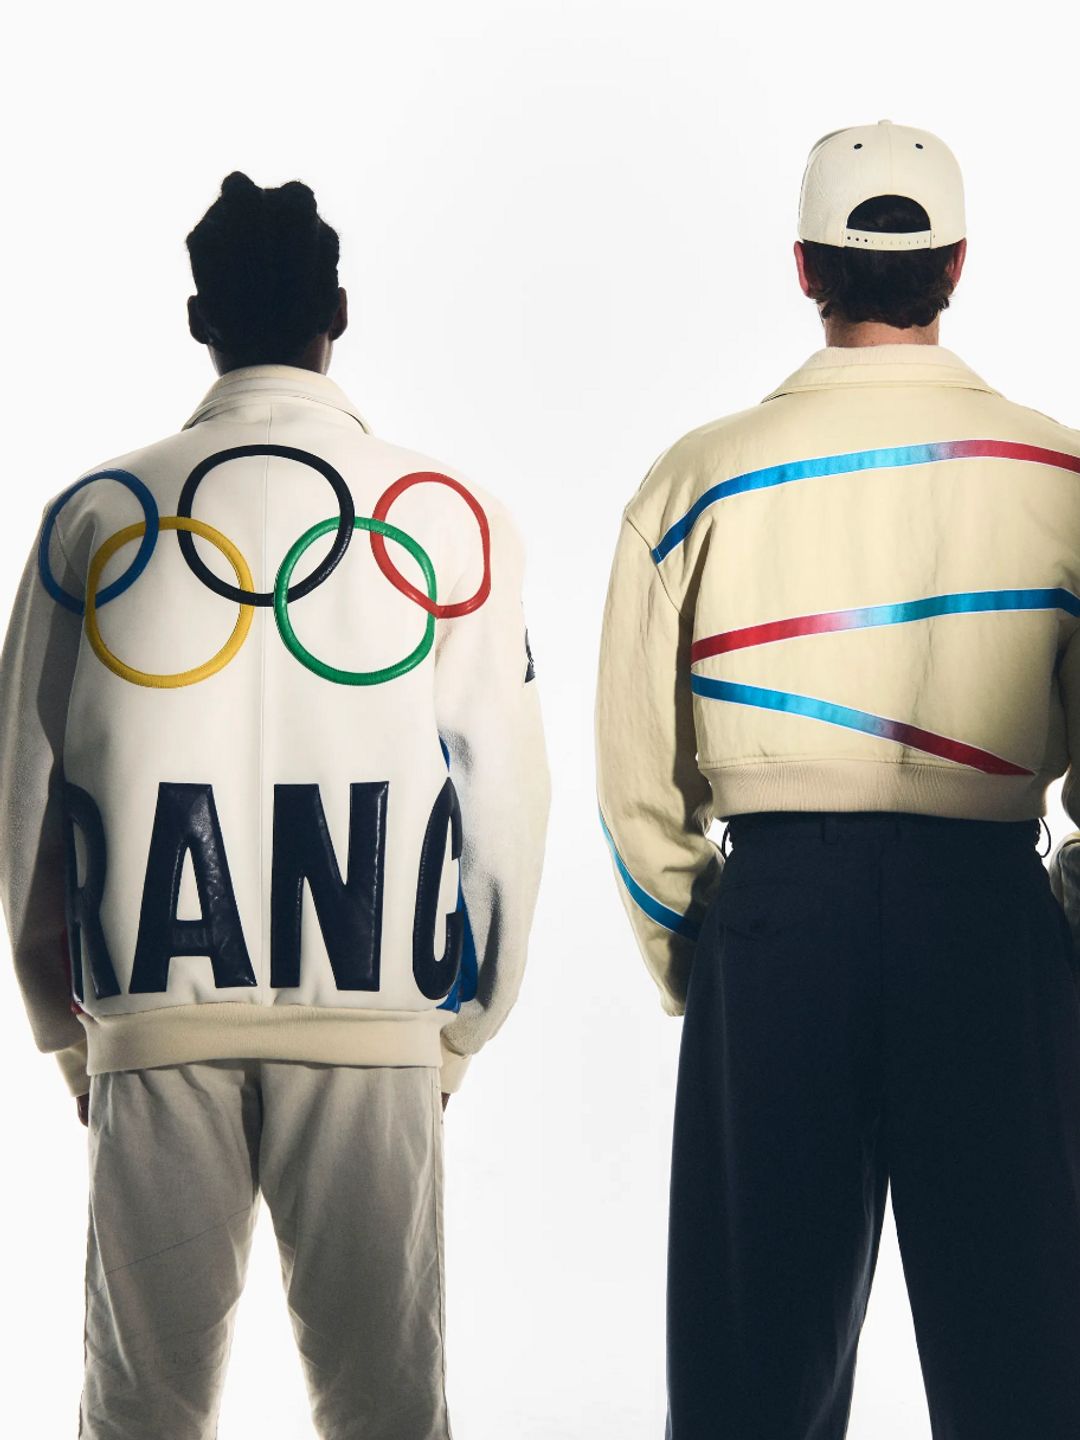 Le Coq Sportif's custom made jackets for Team France